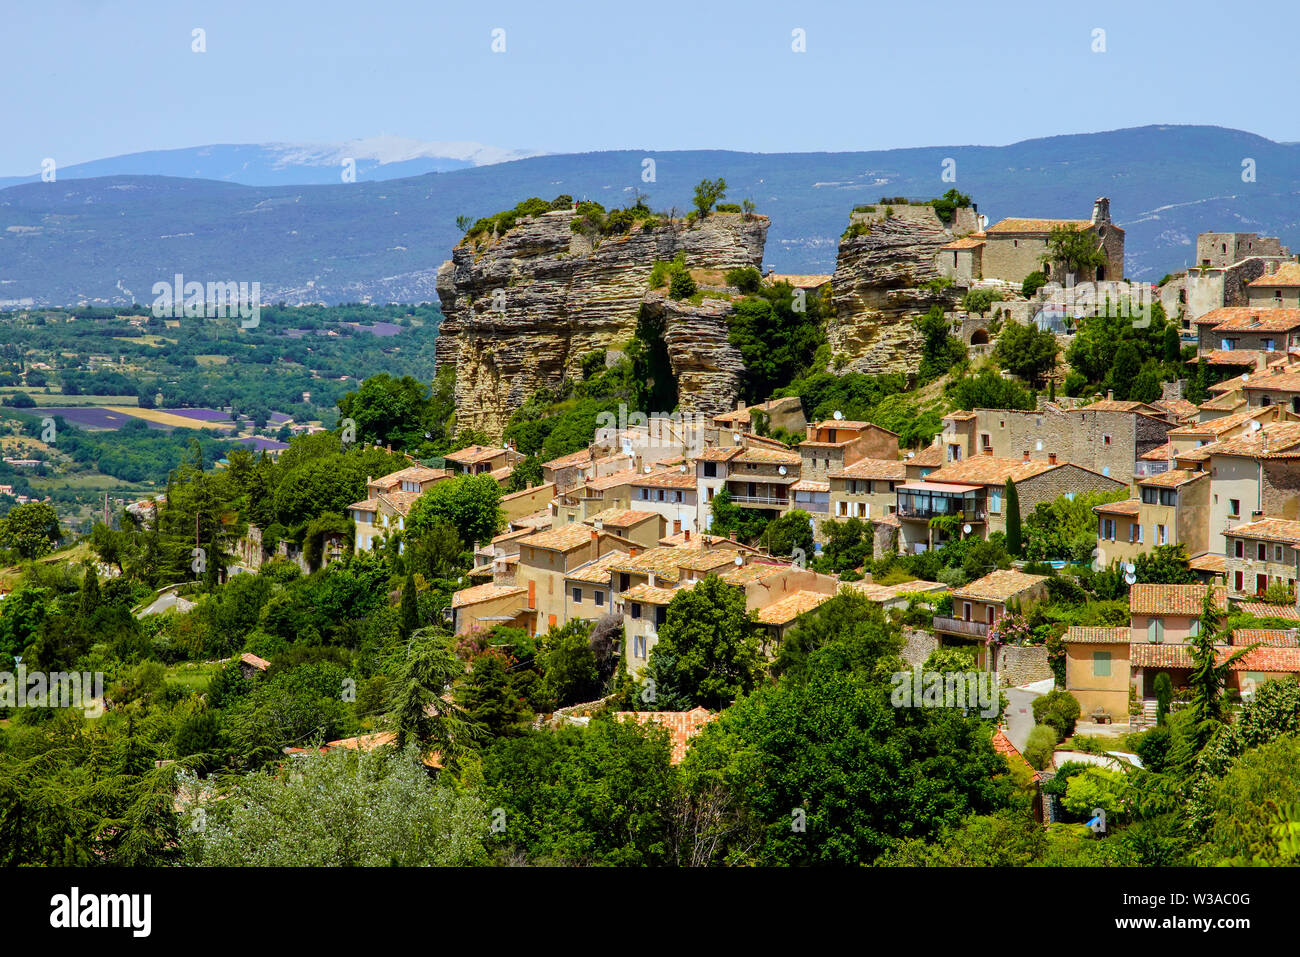 View at the village Saignon located on the rock in the Luberon mountains, Vaucluse, Provence, France. Stock Photo